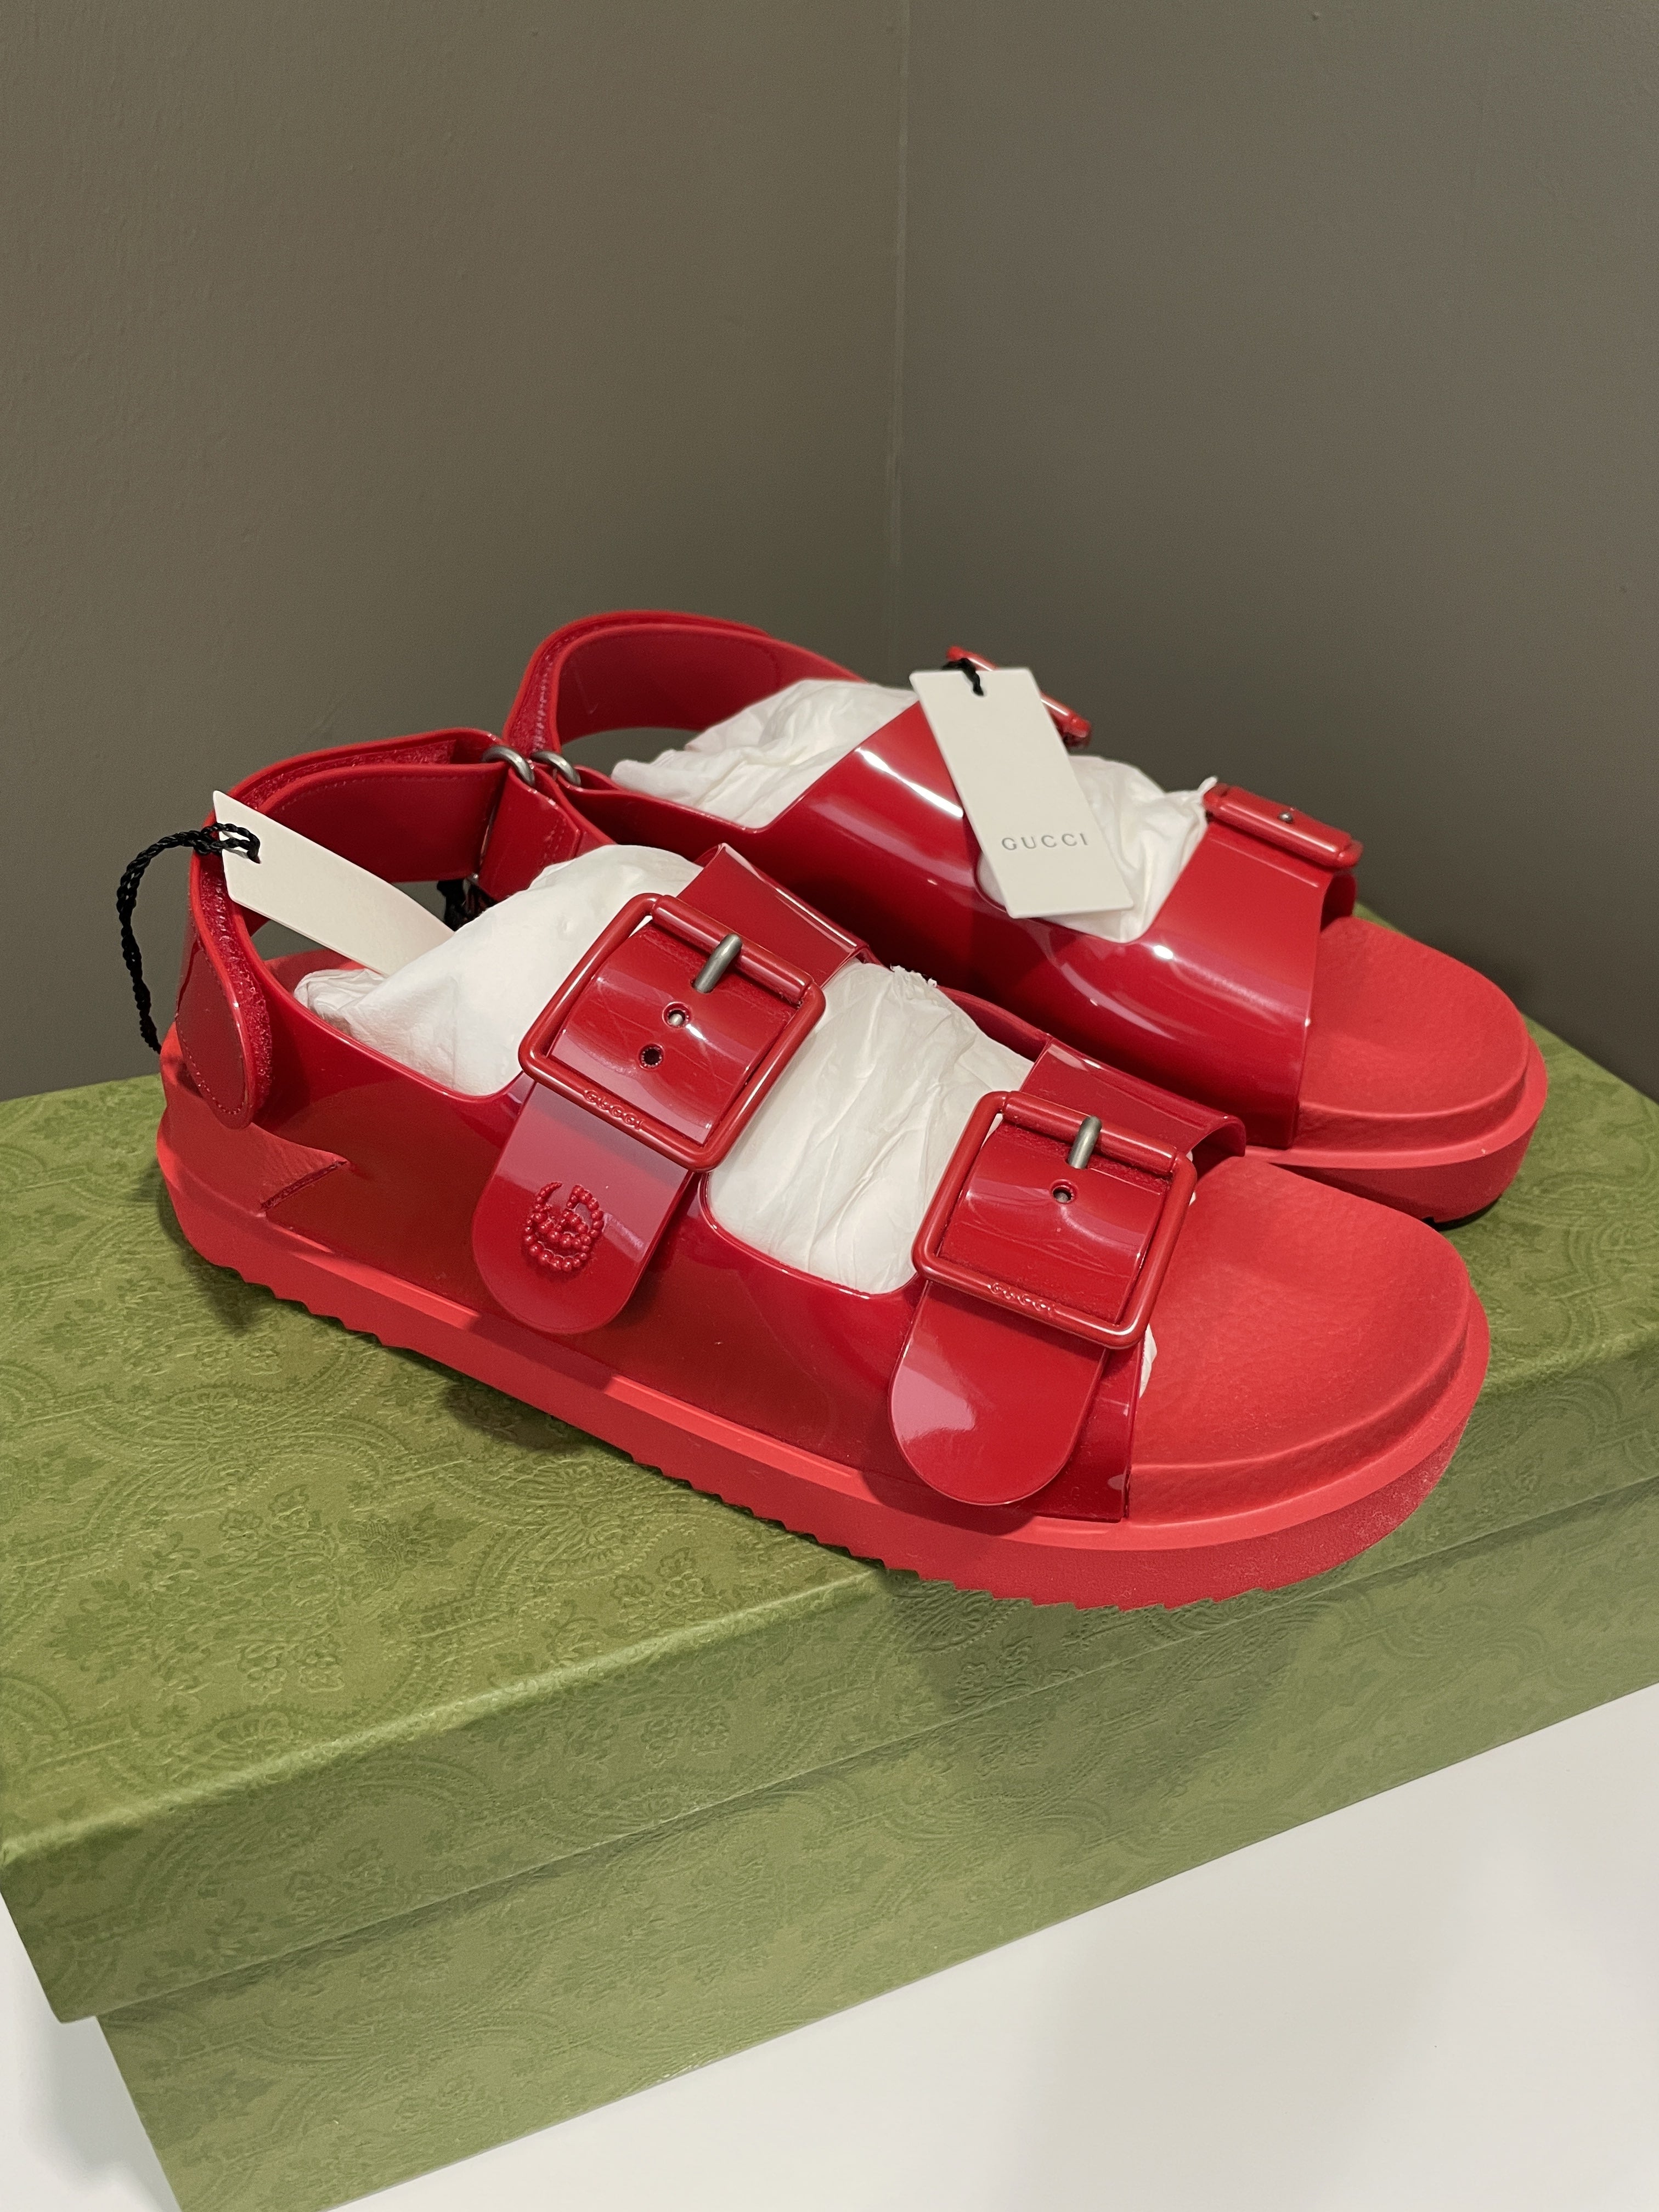 Gucci GG Sandals Red Rubber Size 39